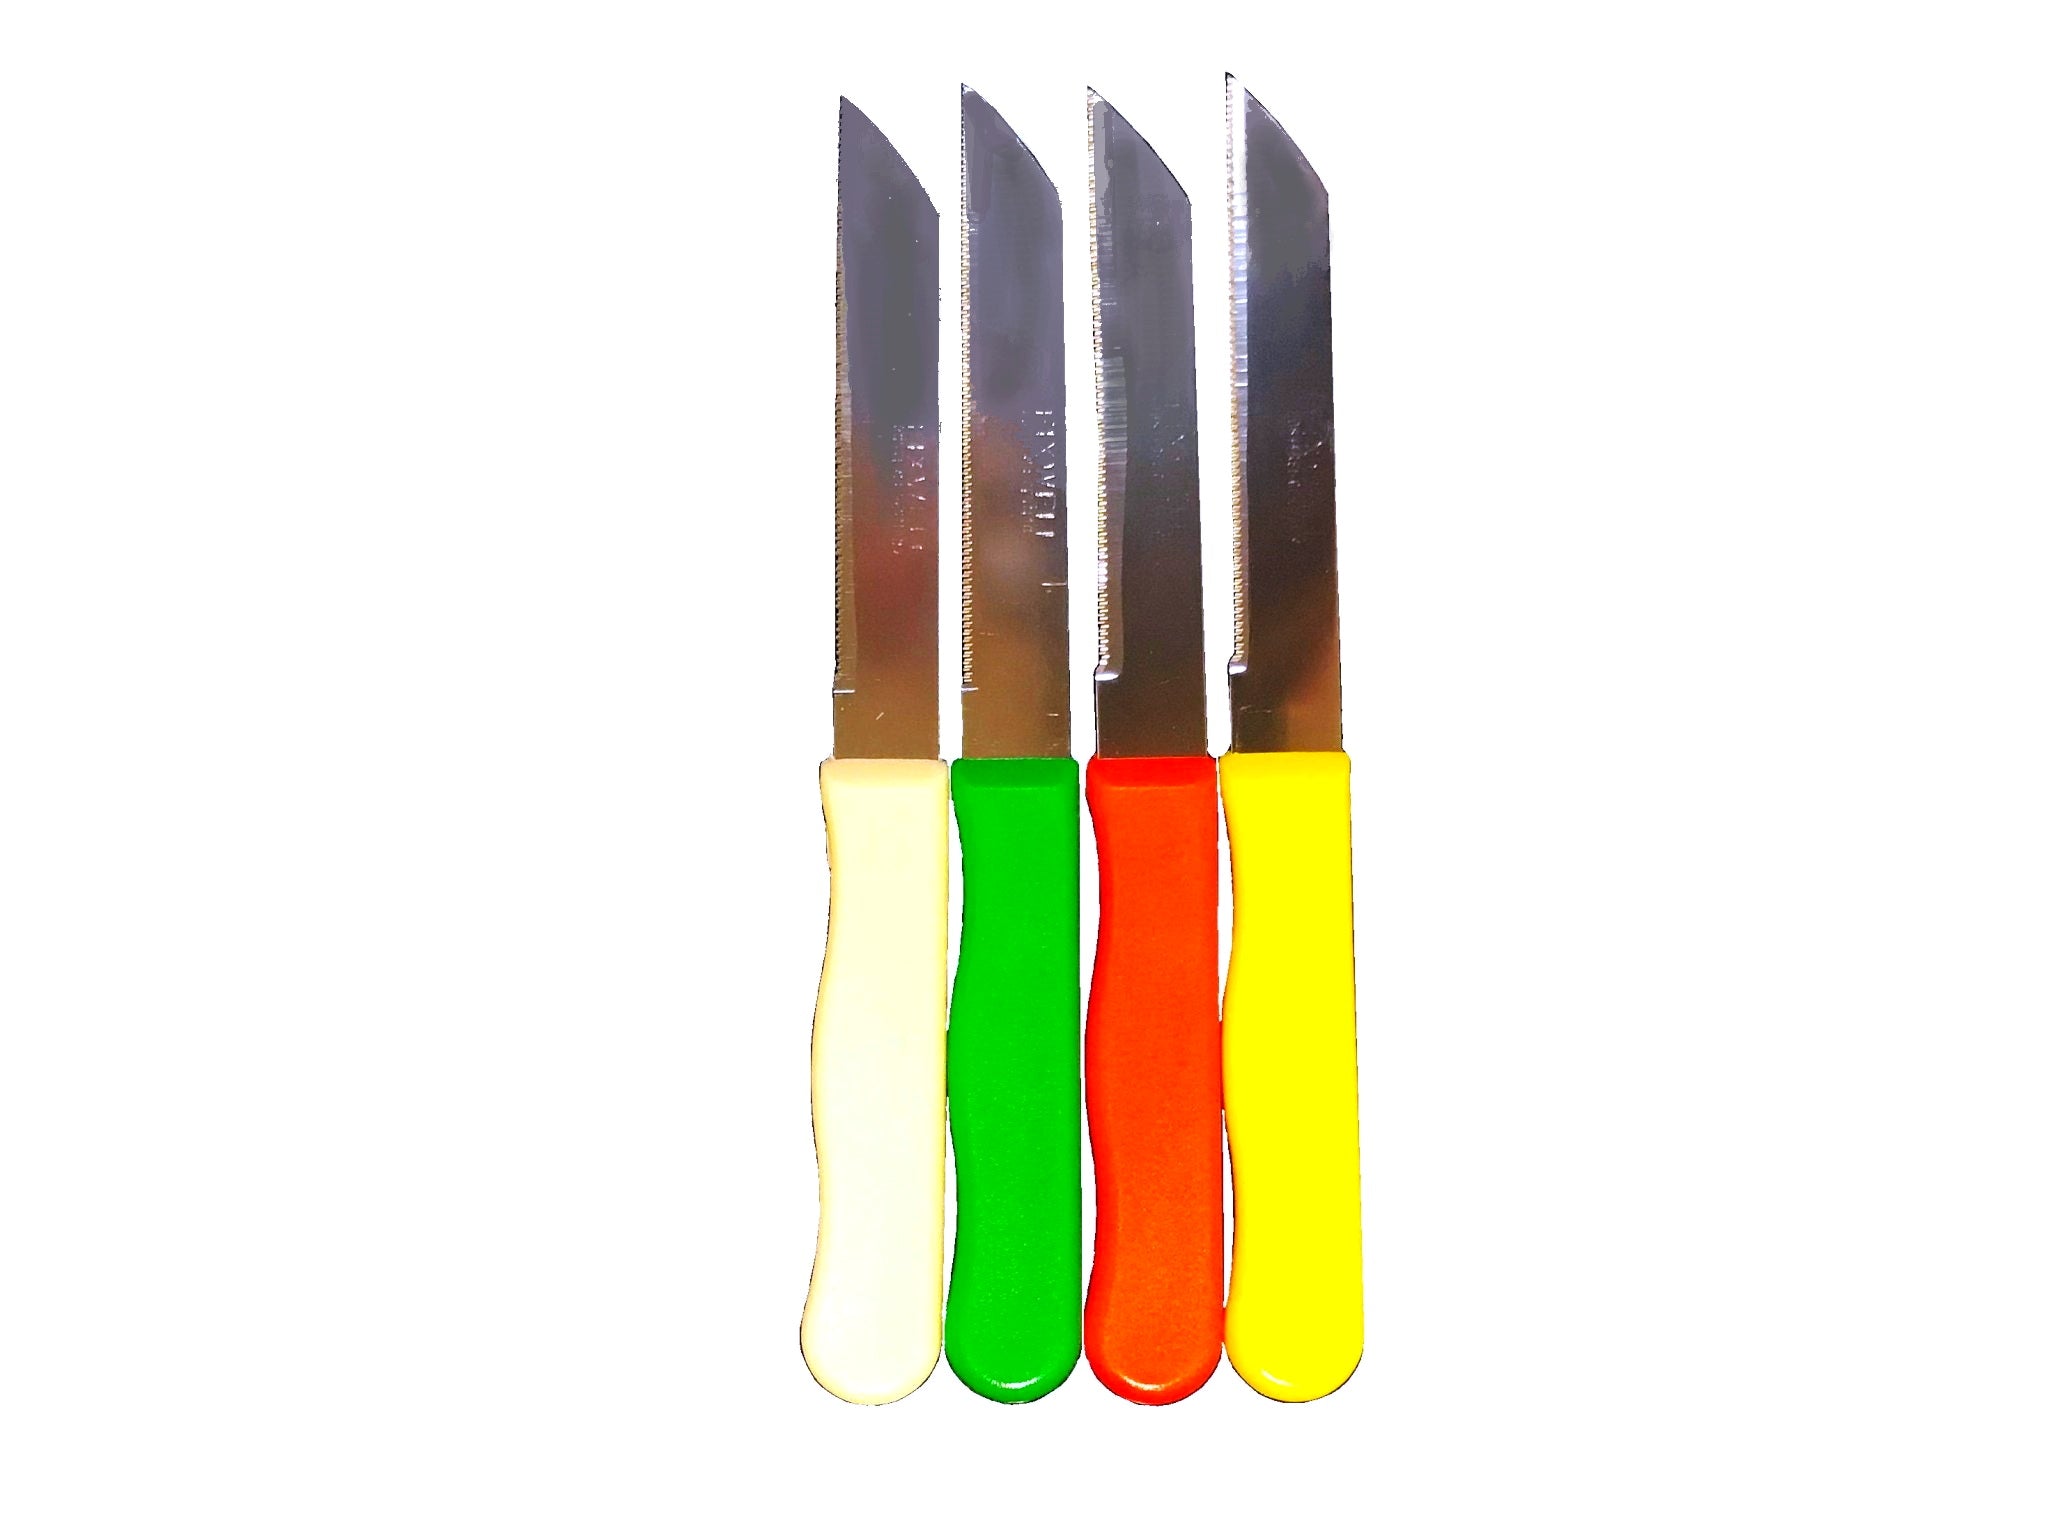 Fixwell Stainless Steel Knife, Assorted Colors